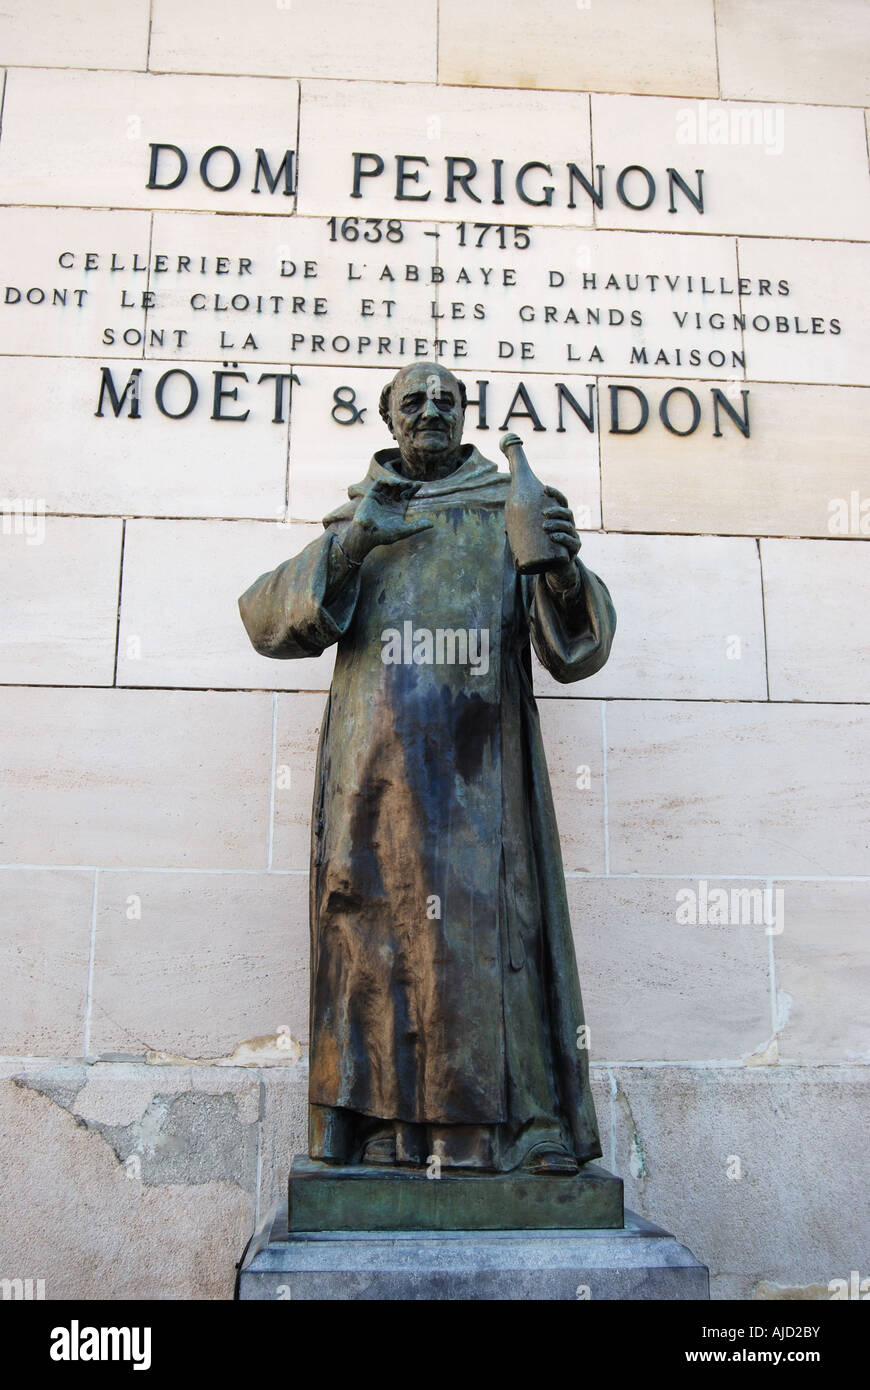 Dom Perignon (1638 - 1715) the French Benedictine monk who made important  contributions to the production and quality of champagne wine Stock Photo -  Alamy